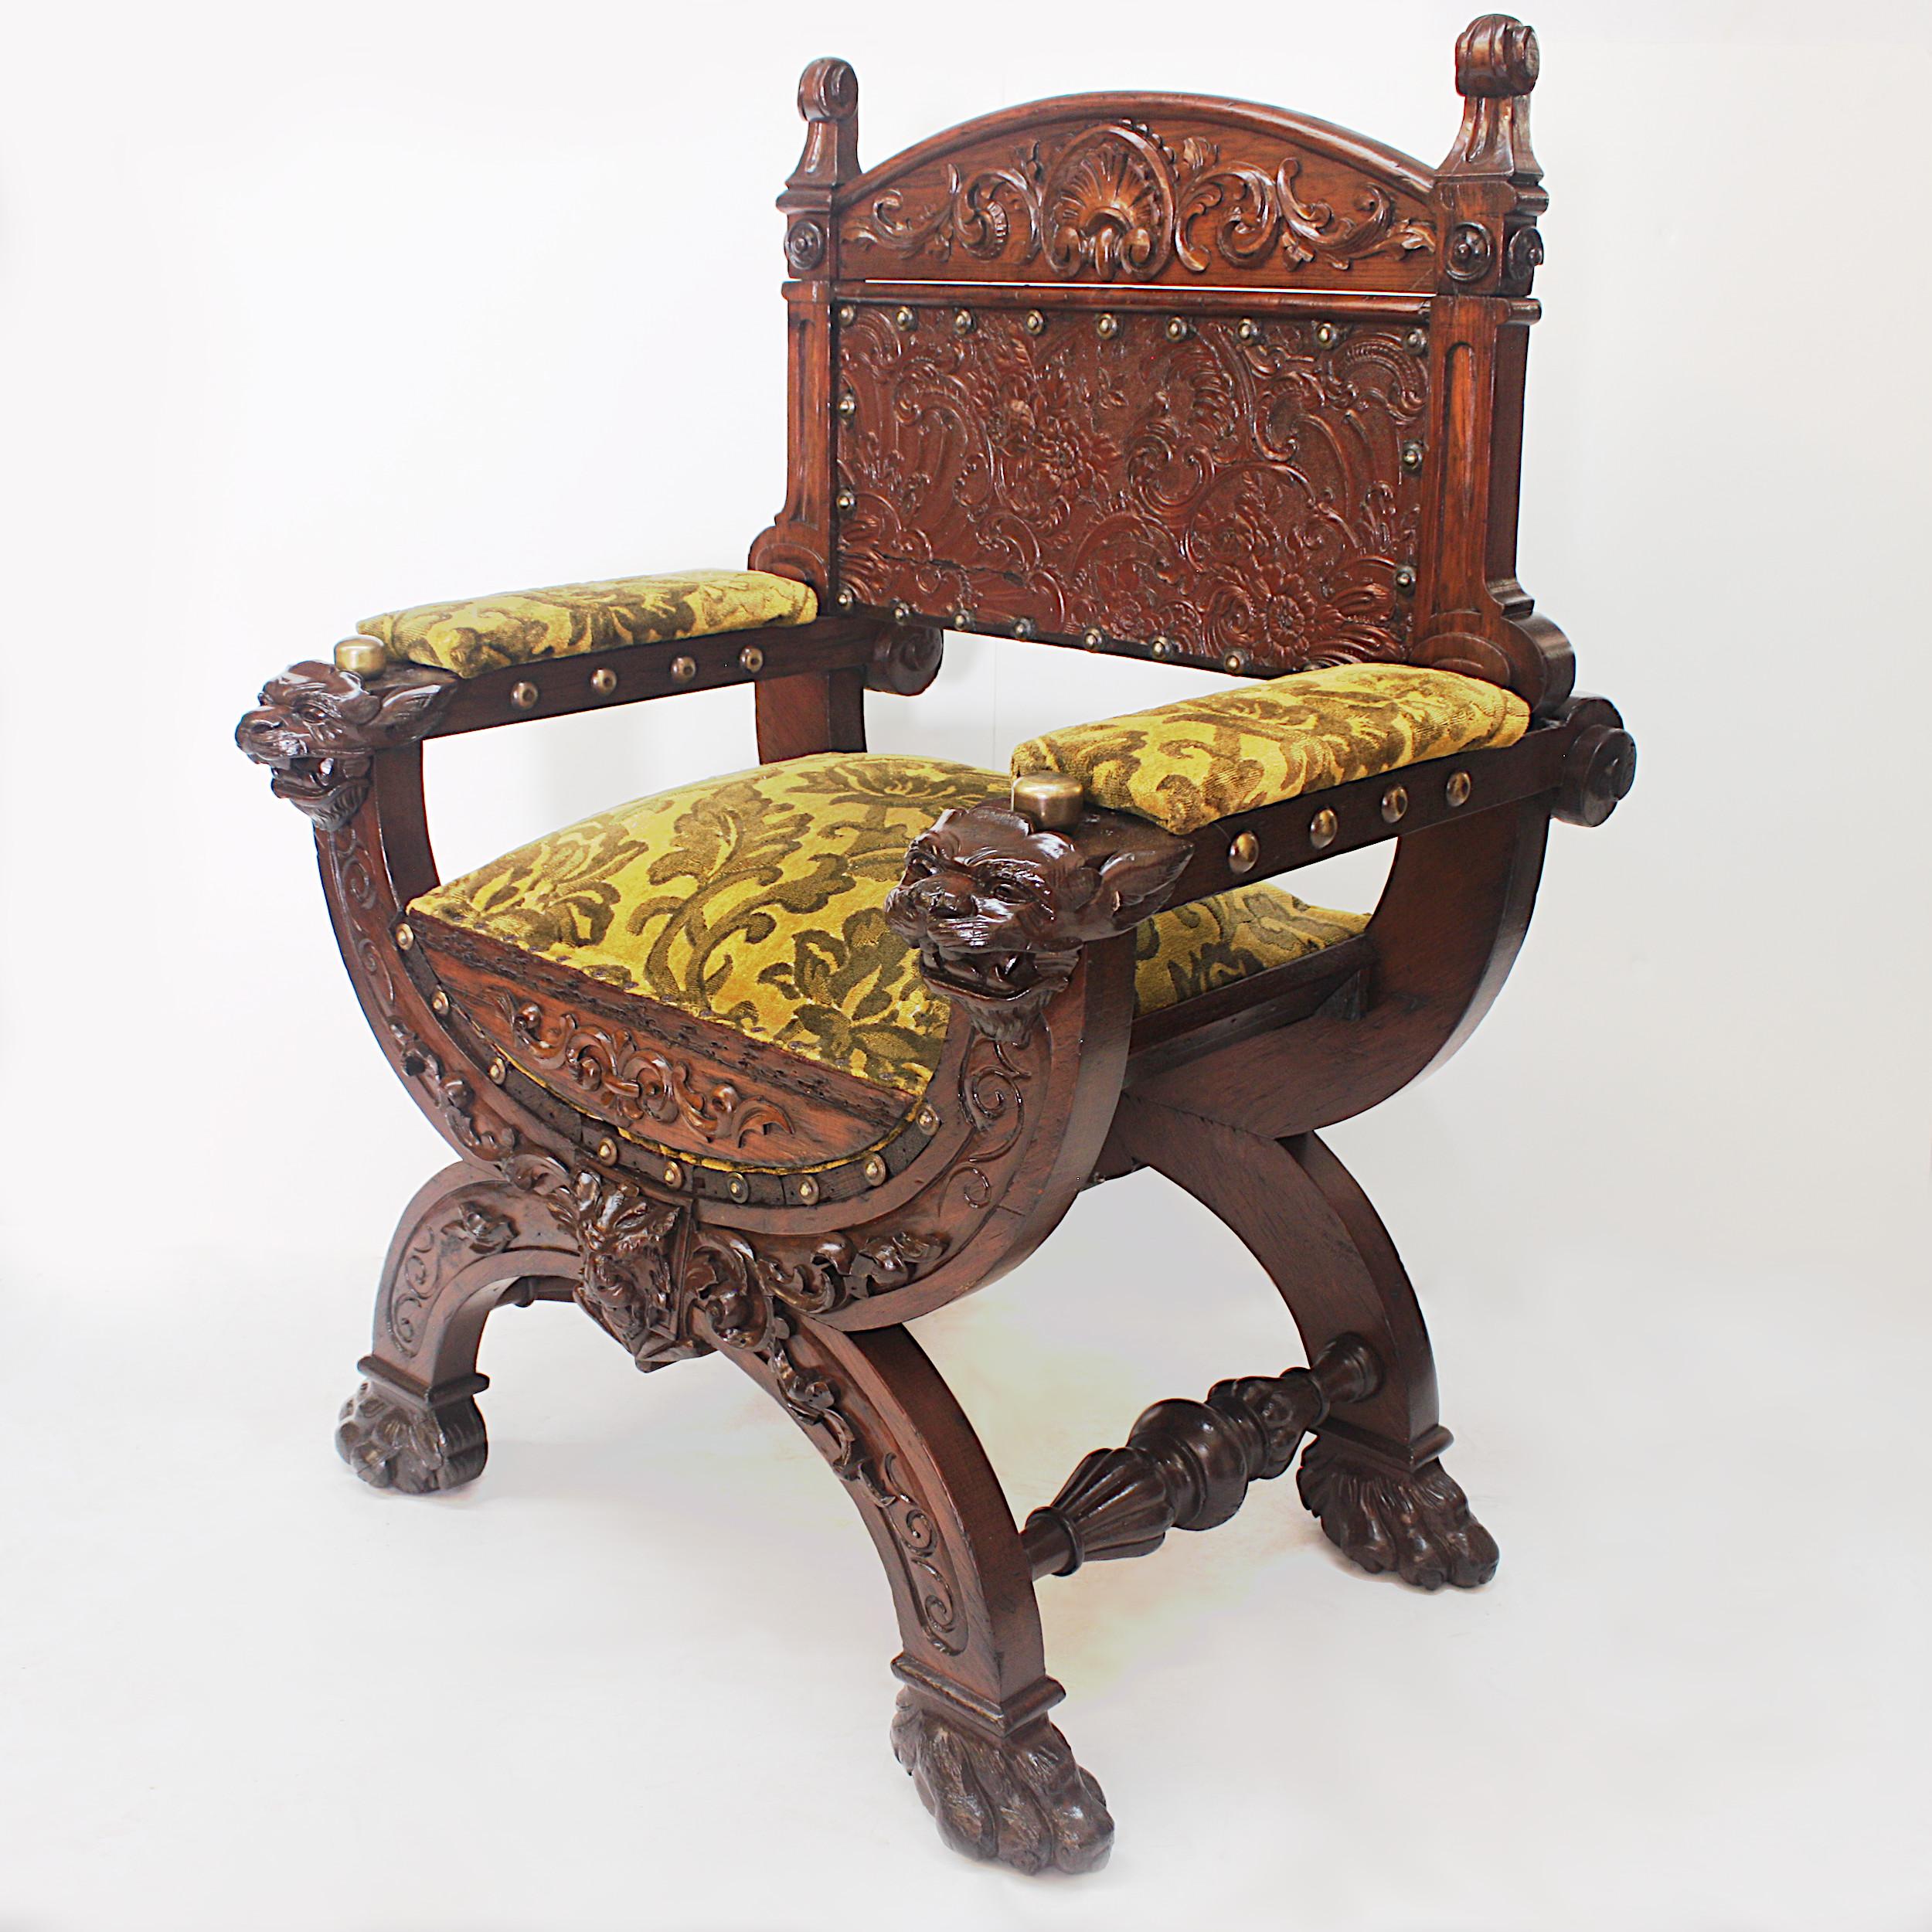 This is a very unique photographer's posing chair from the early 20th Century. Chair features original upholstery, tooled leather, ornately carved wood frame, and novel convertible design that allows the back, seat, and frame to be flipped around to